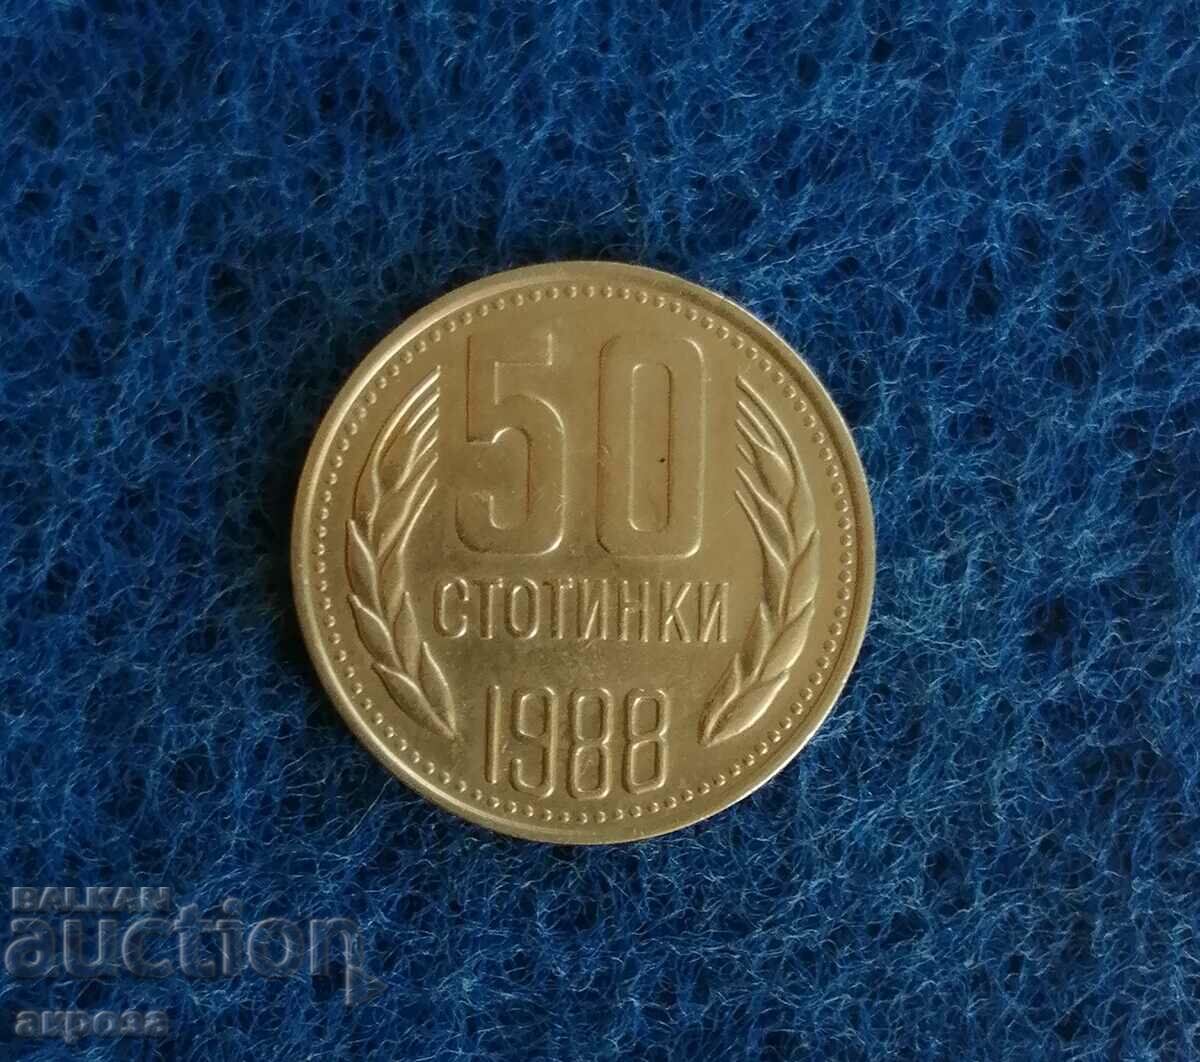 50 cents 1988